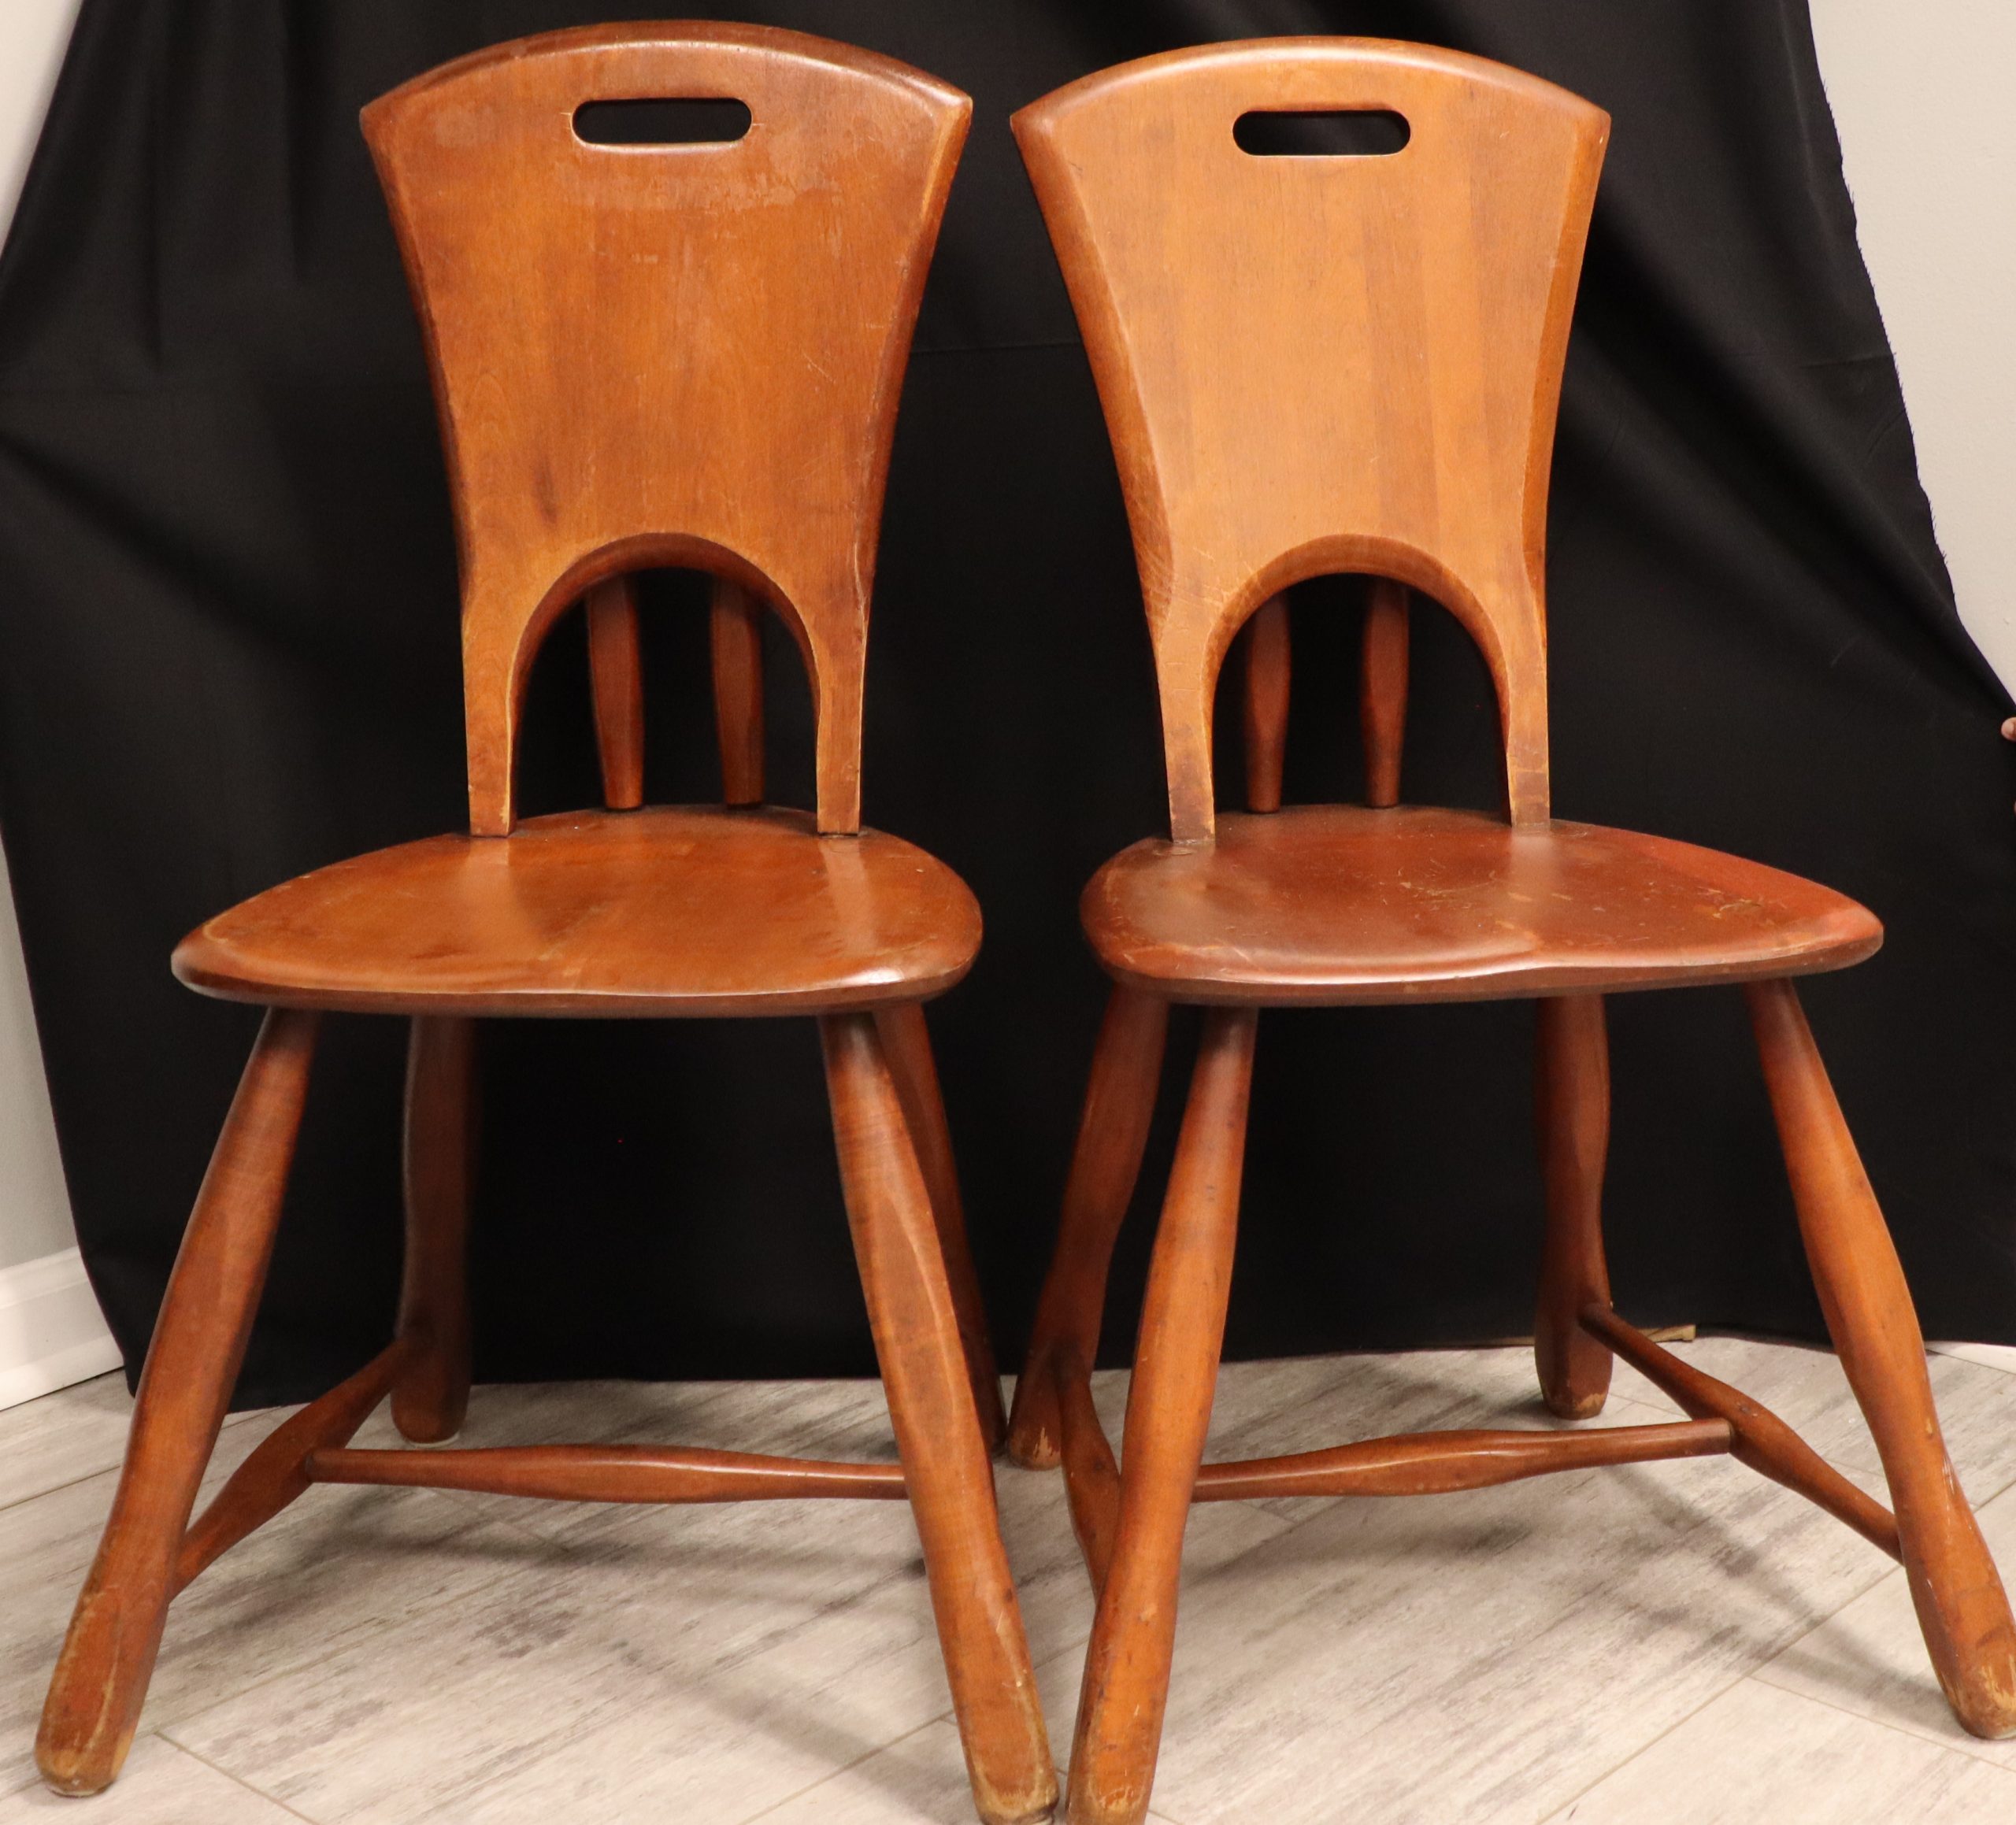 50 Set of 2 mid-century modern solid wood sculptural craft rustic dining chair a